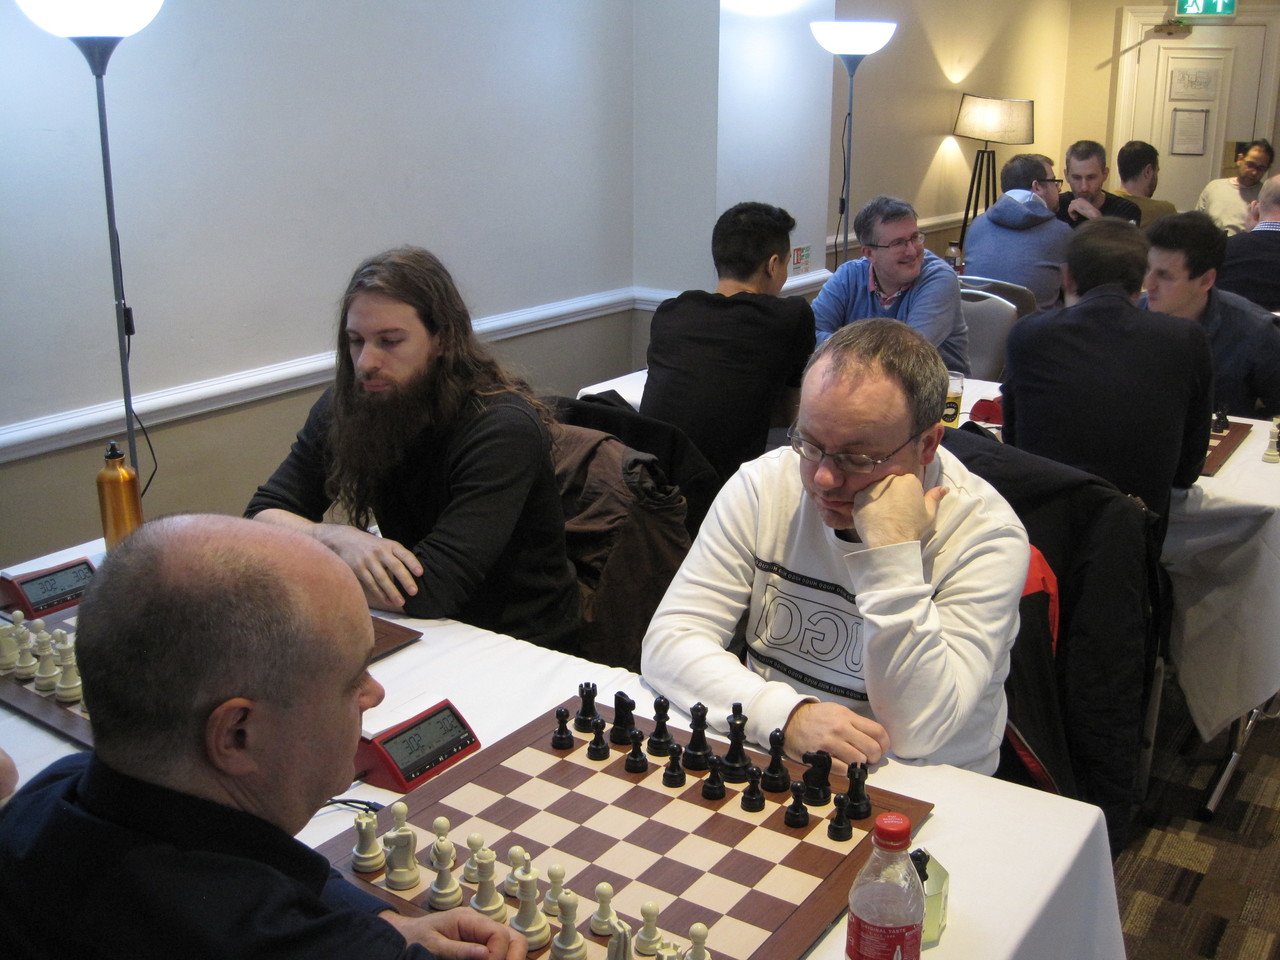 FIDE and Chess24 hold a fundraising marathon for Ukraine on Women's Day